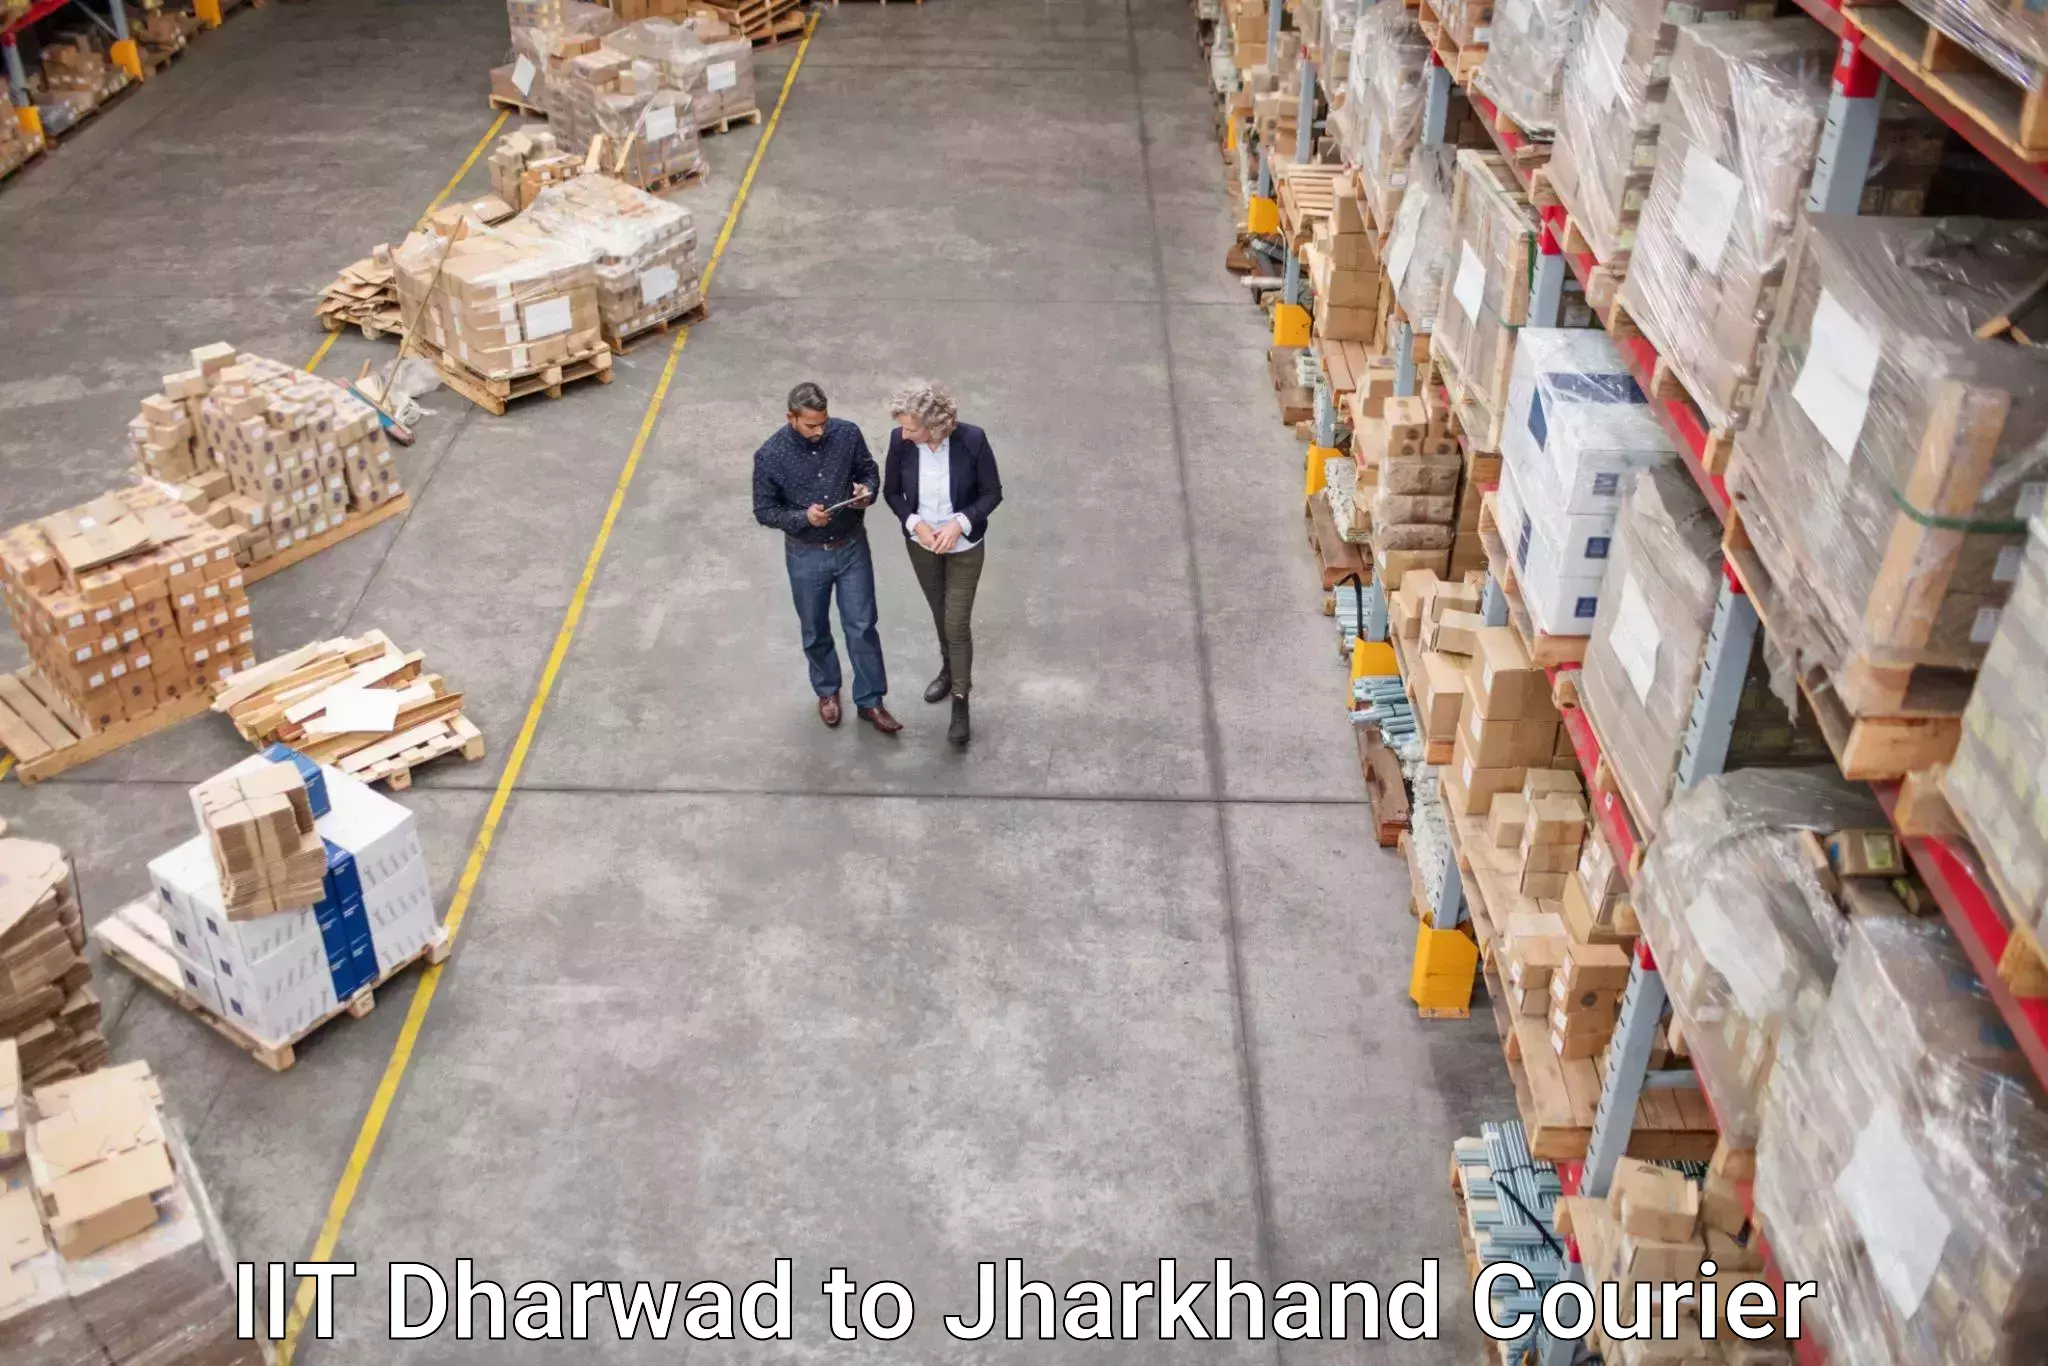 Express package services IIT Dharwad to Jharkhand